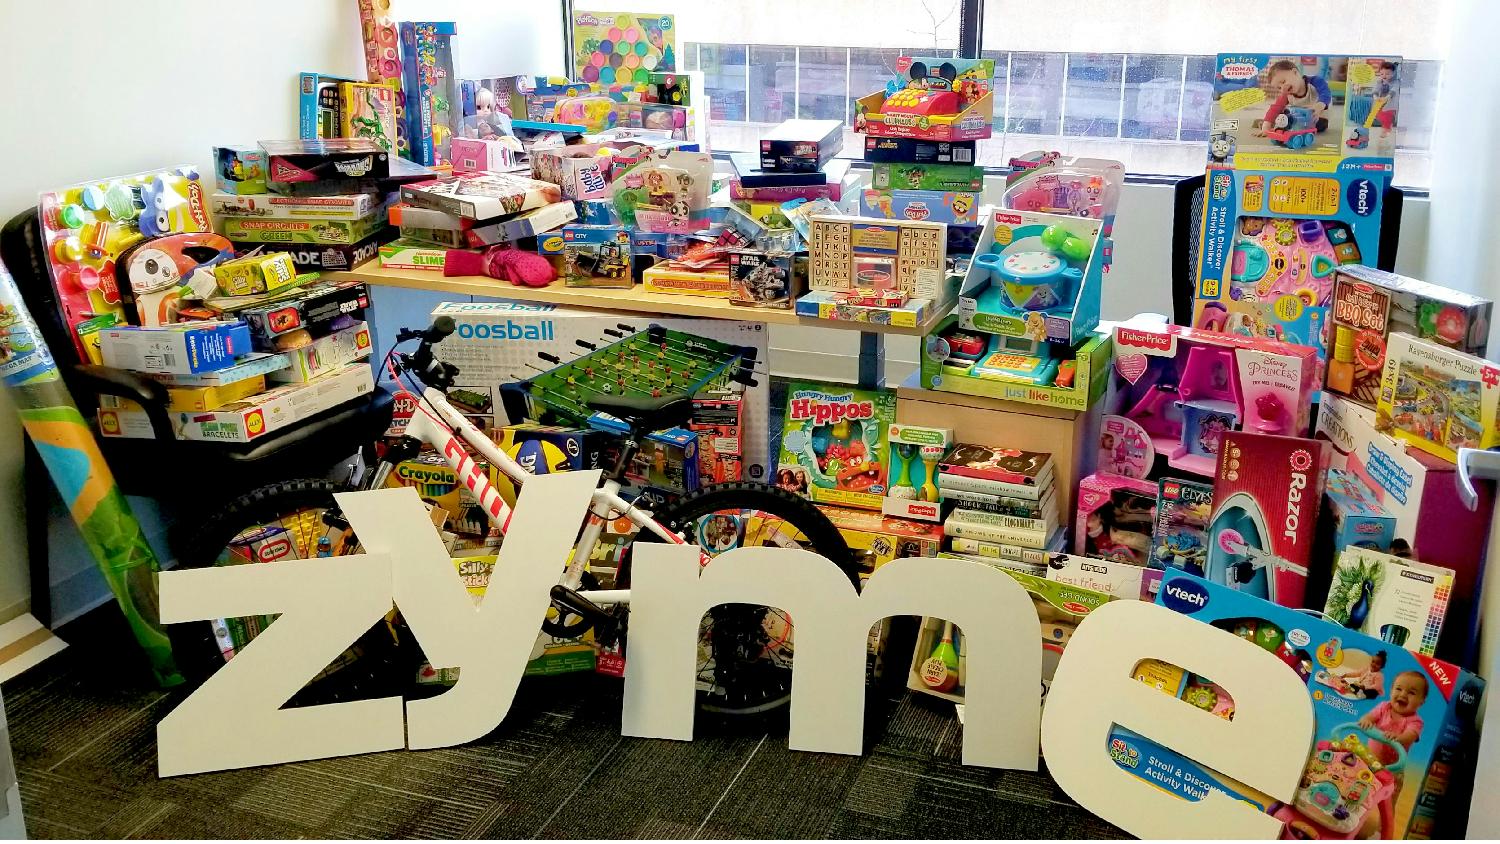 Zymers show their care for others through a number of fundraising events. Here is a picture of our annual toy drive.